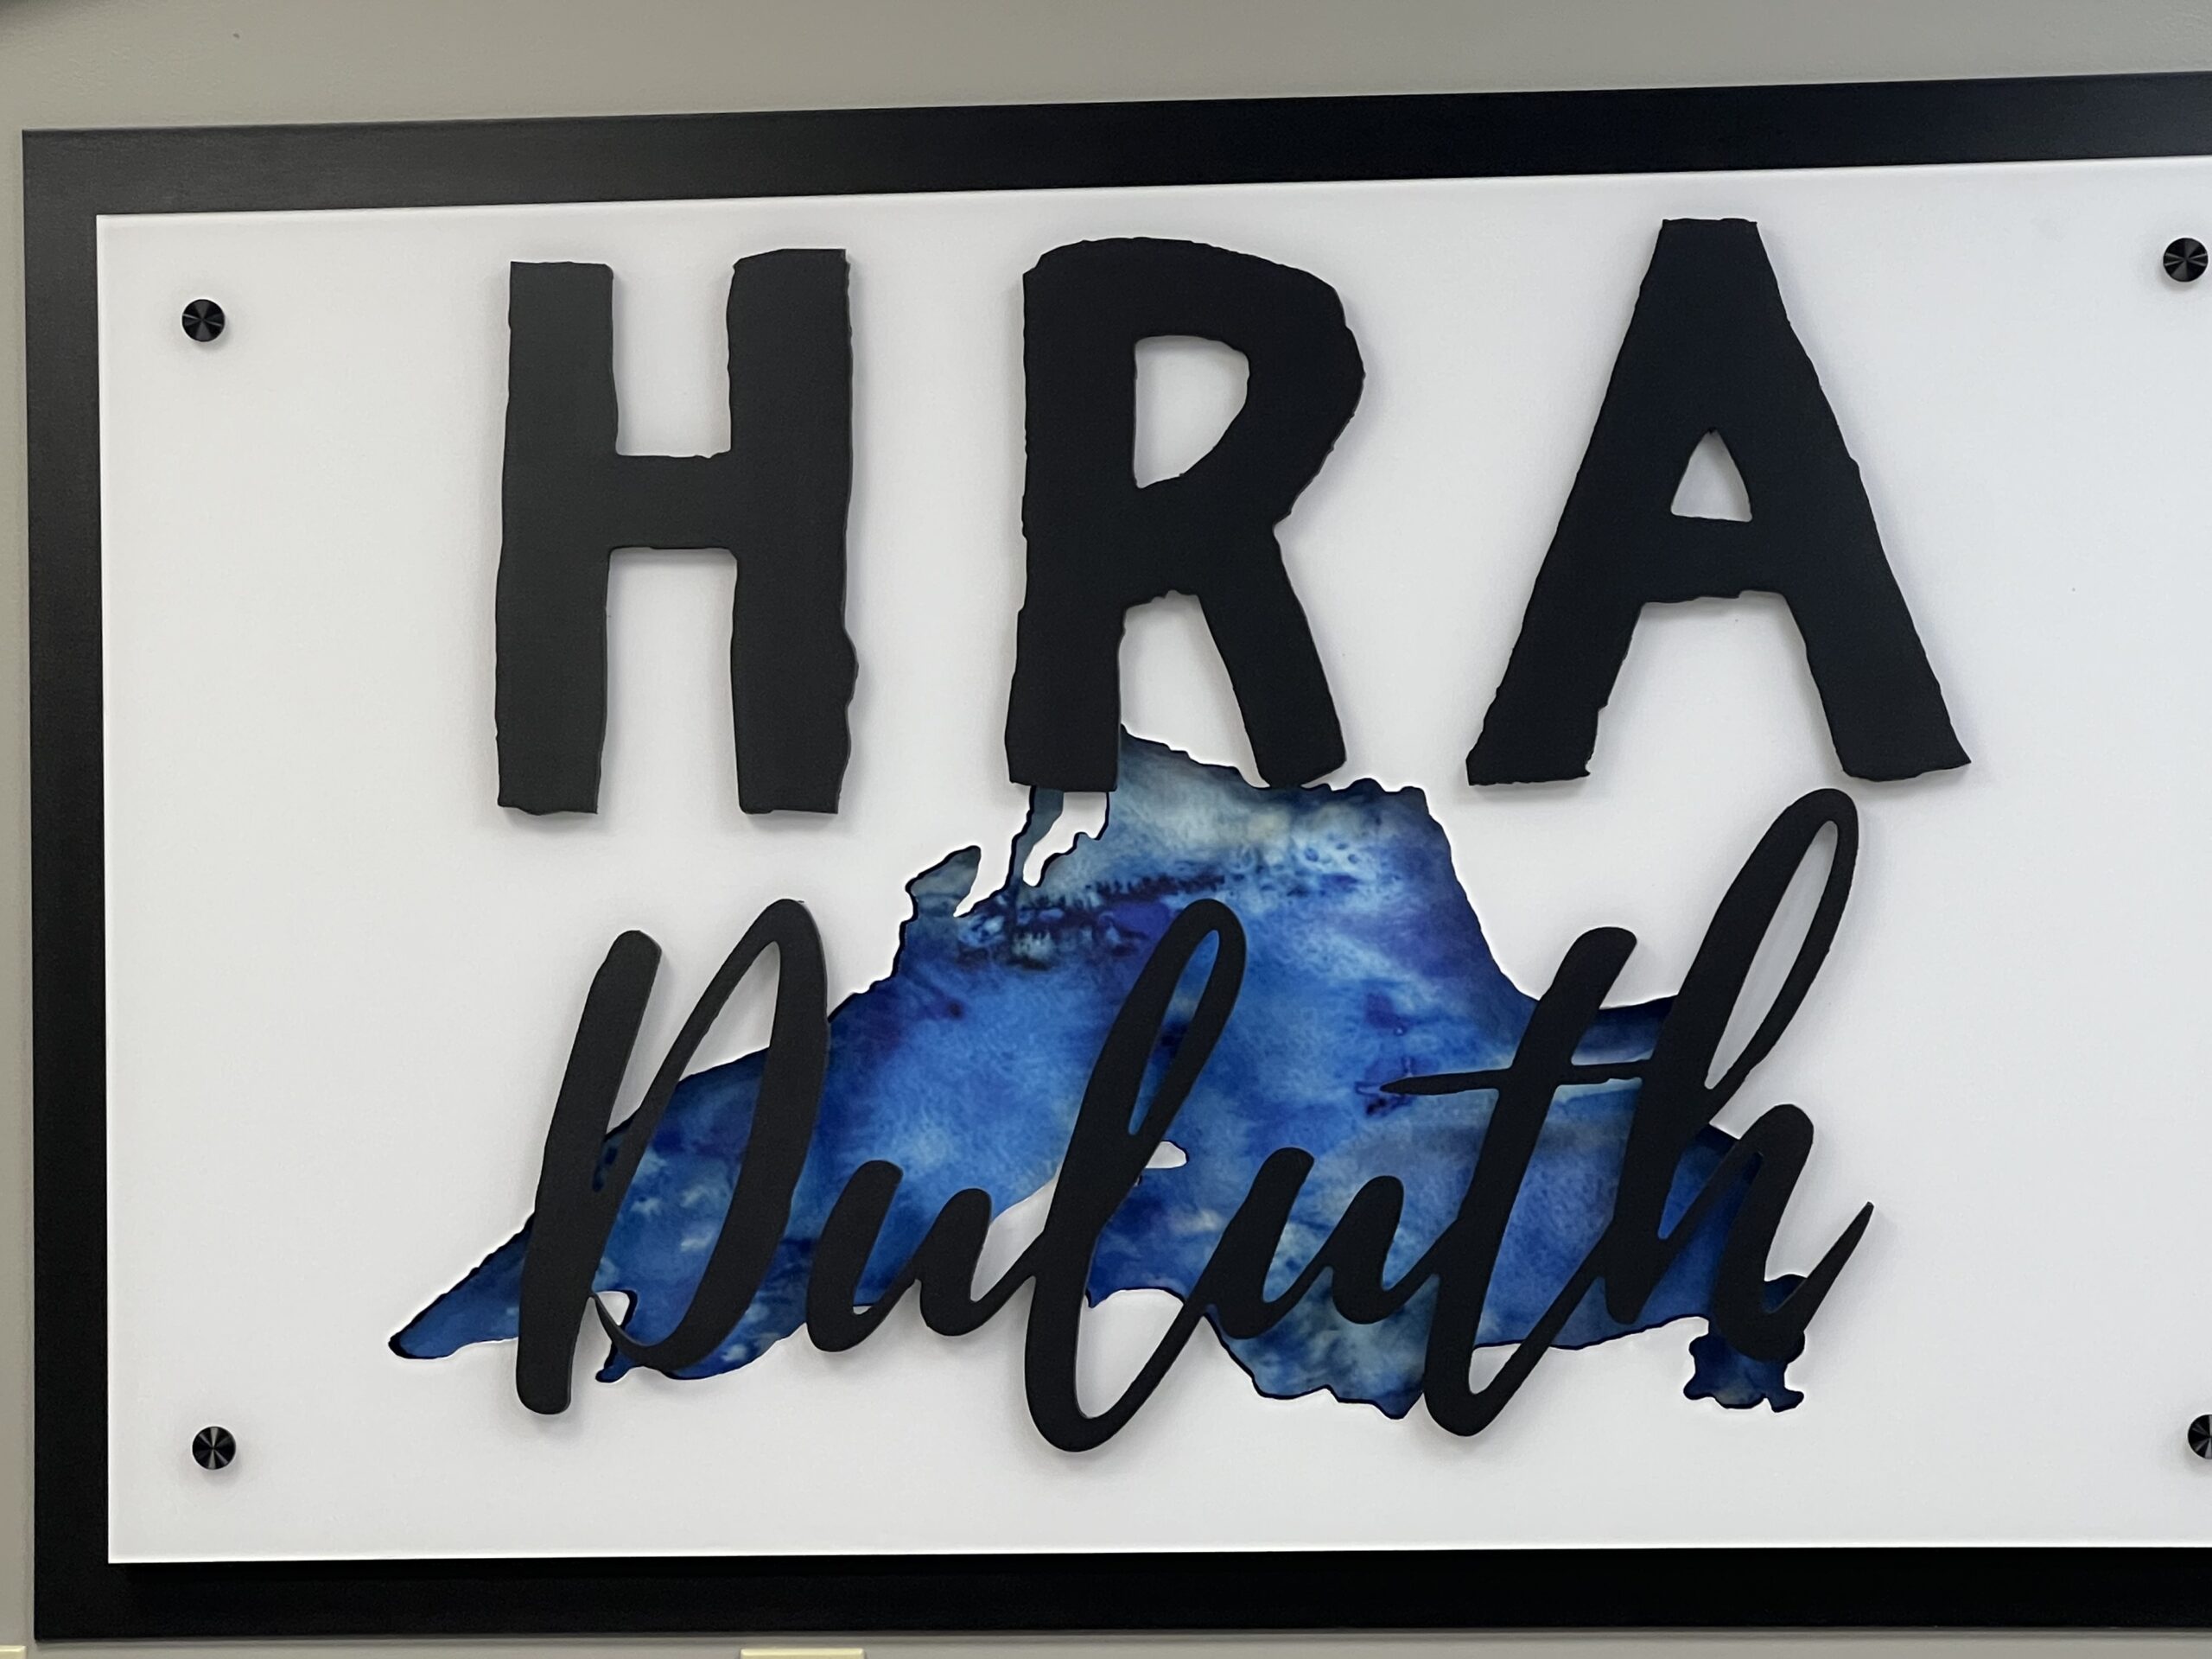 large font that says "HRA Duluth"